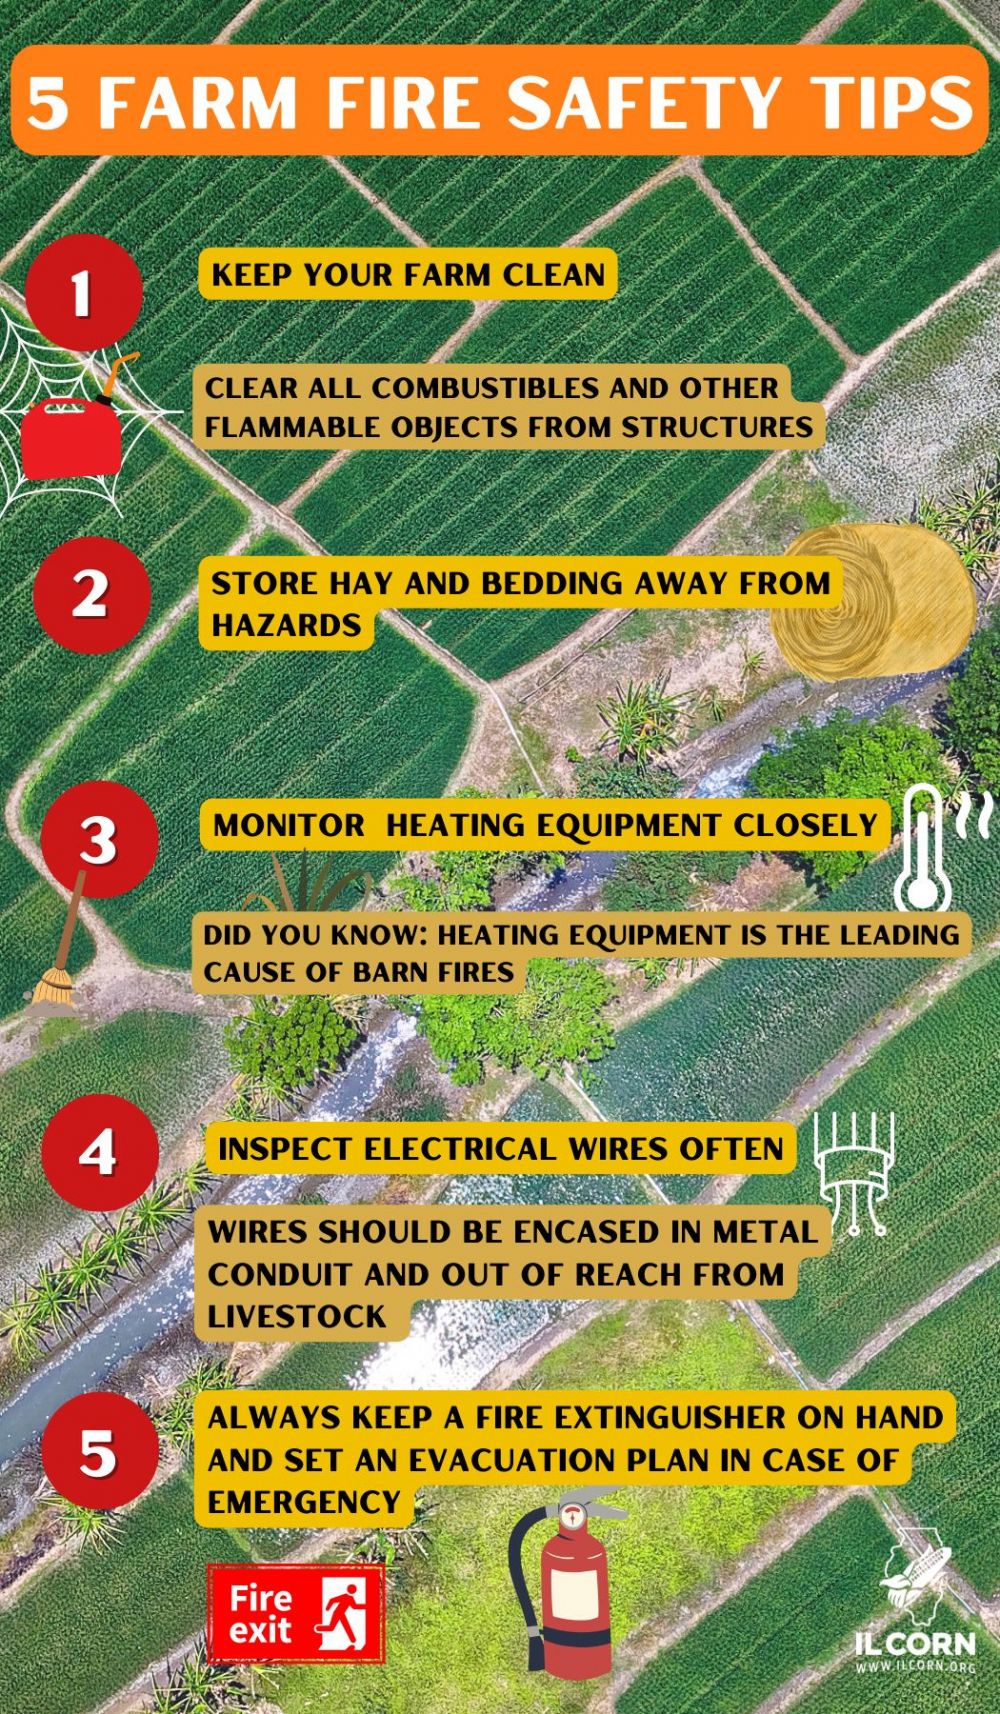 5 farm fire safety tips graphic